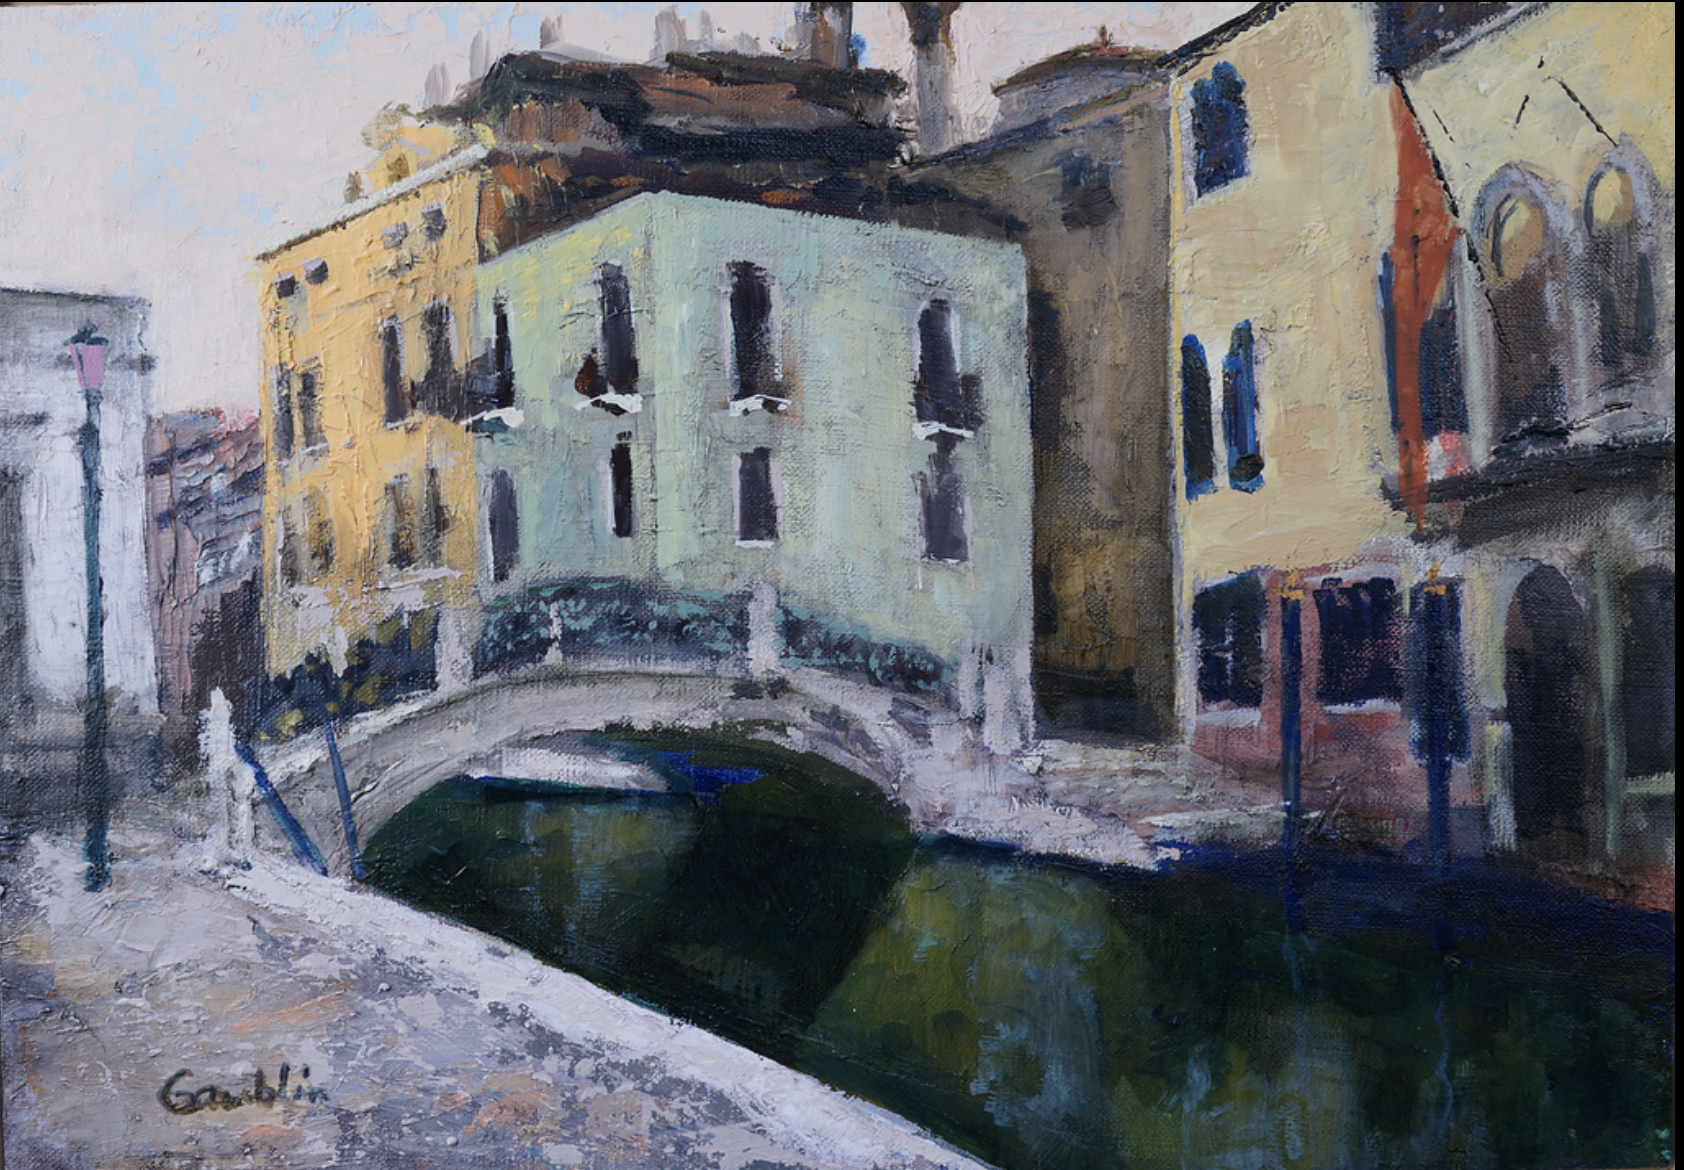 Image of a canal in Venice